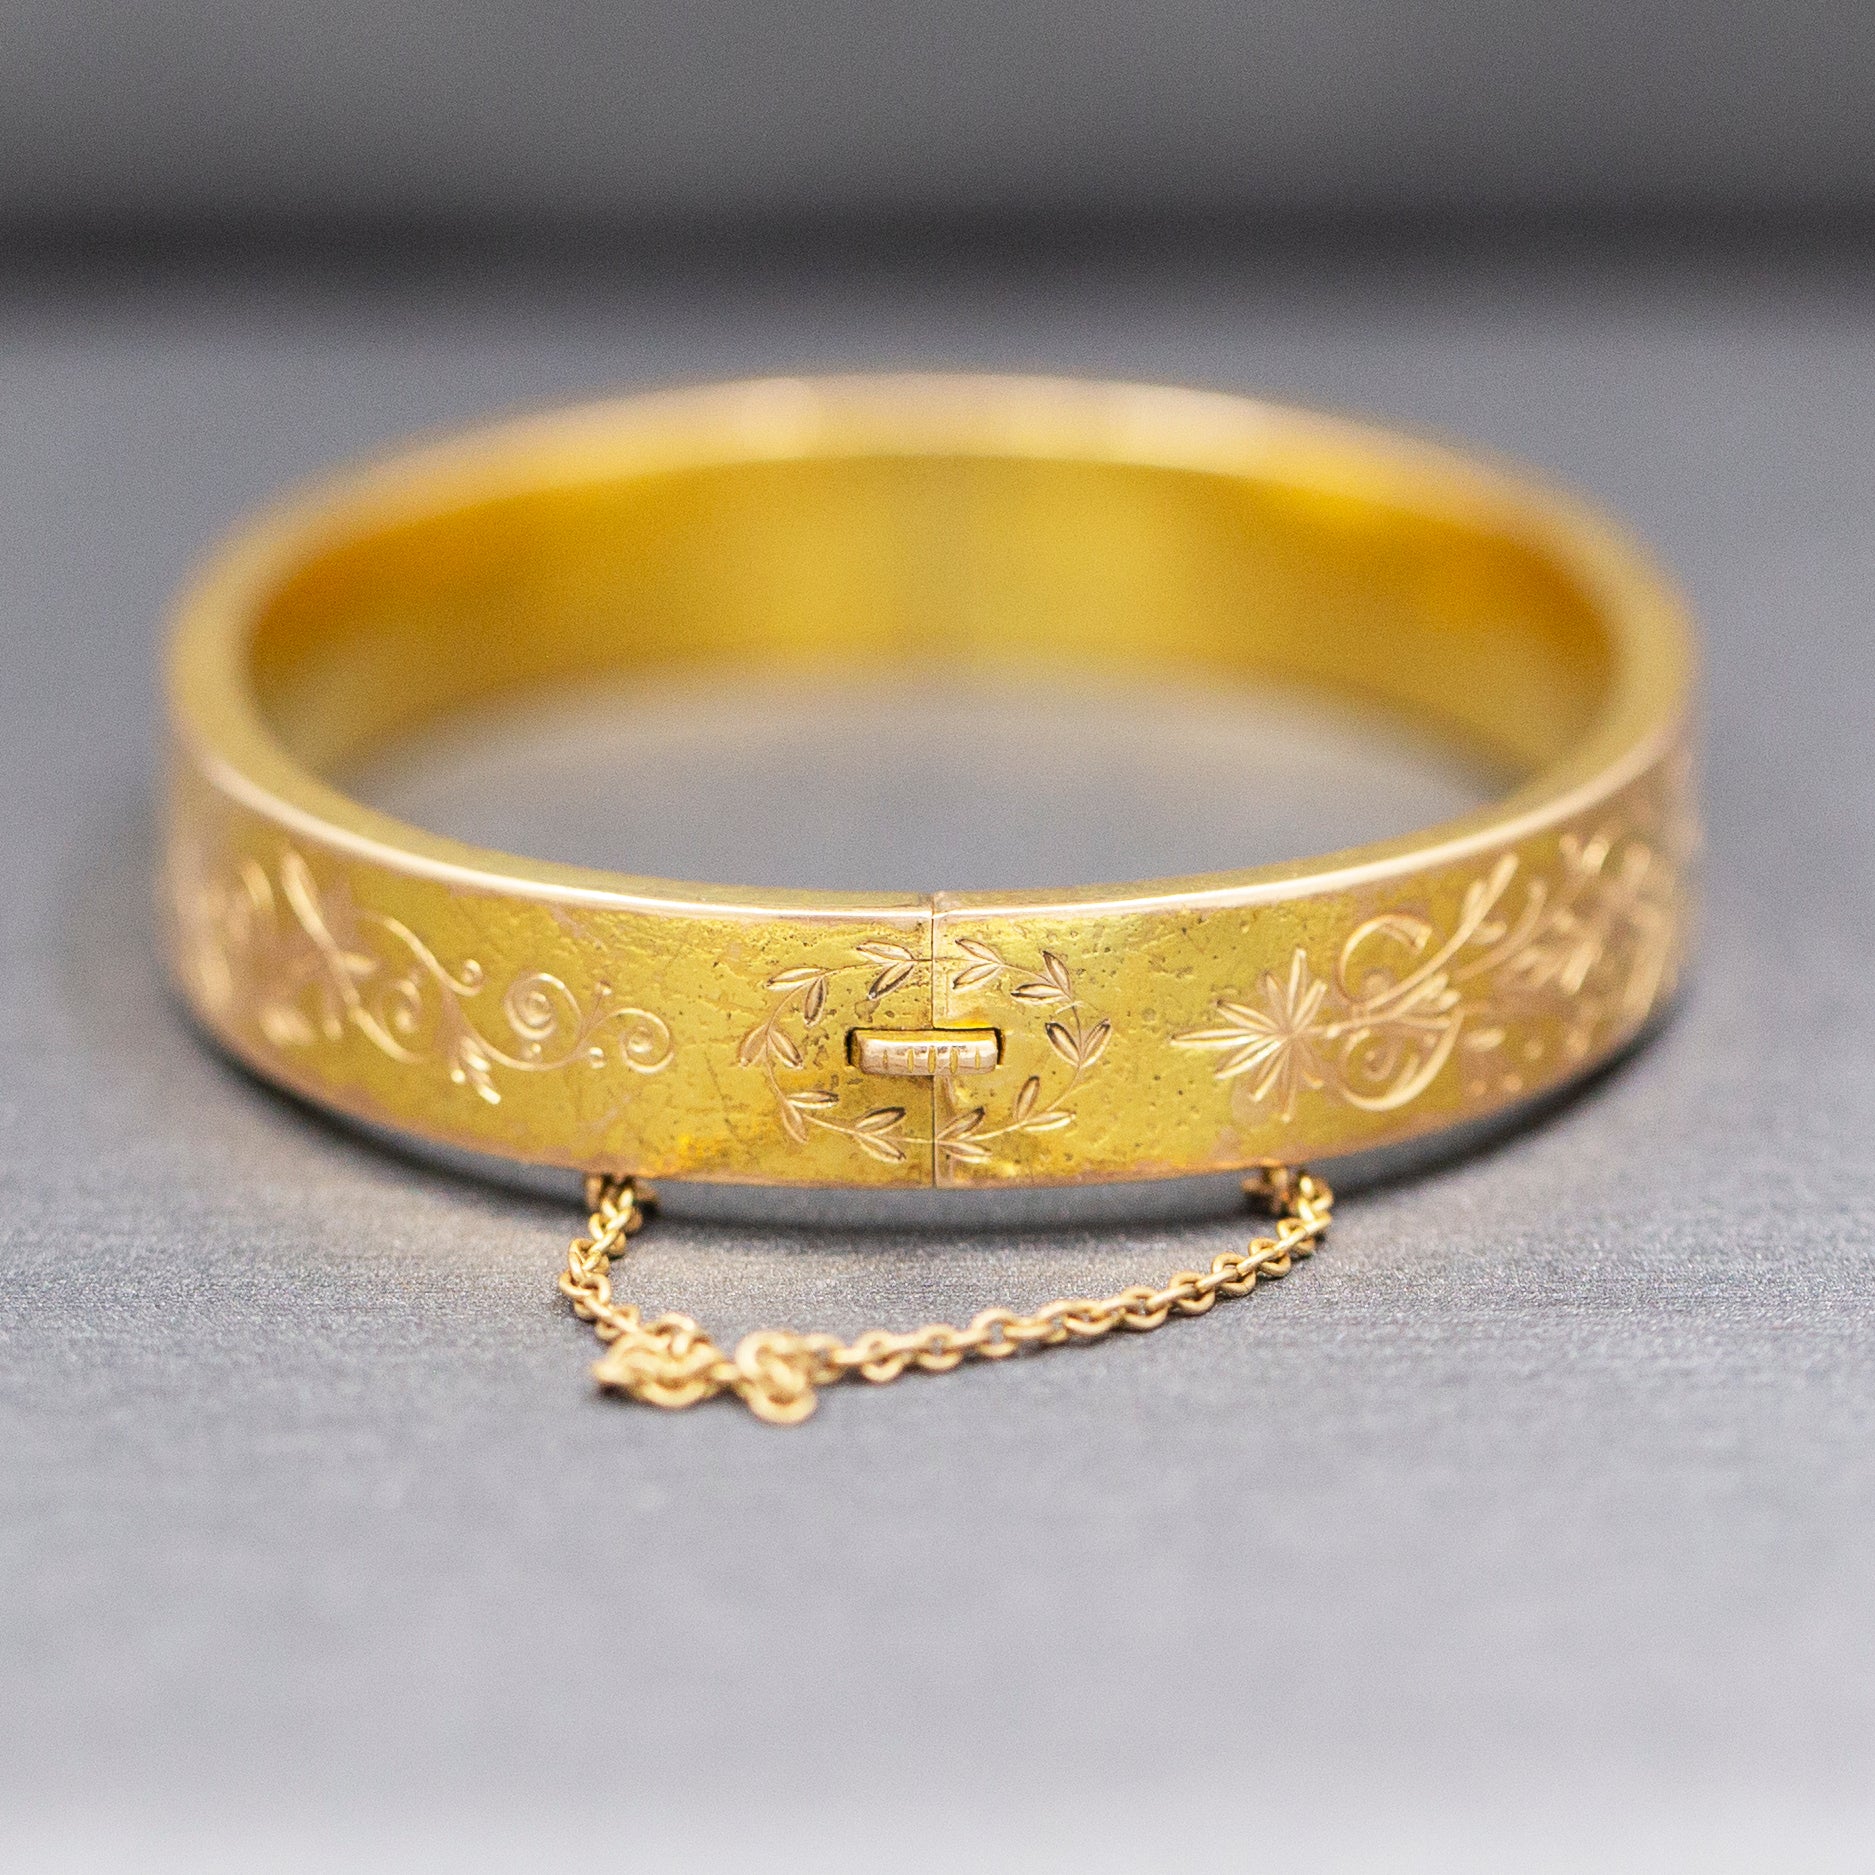 Antique Victorian Floral Engraved Oval Hinged Bangle Bracelet in 14k Yellow Gold